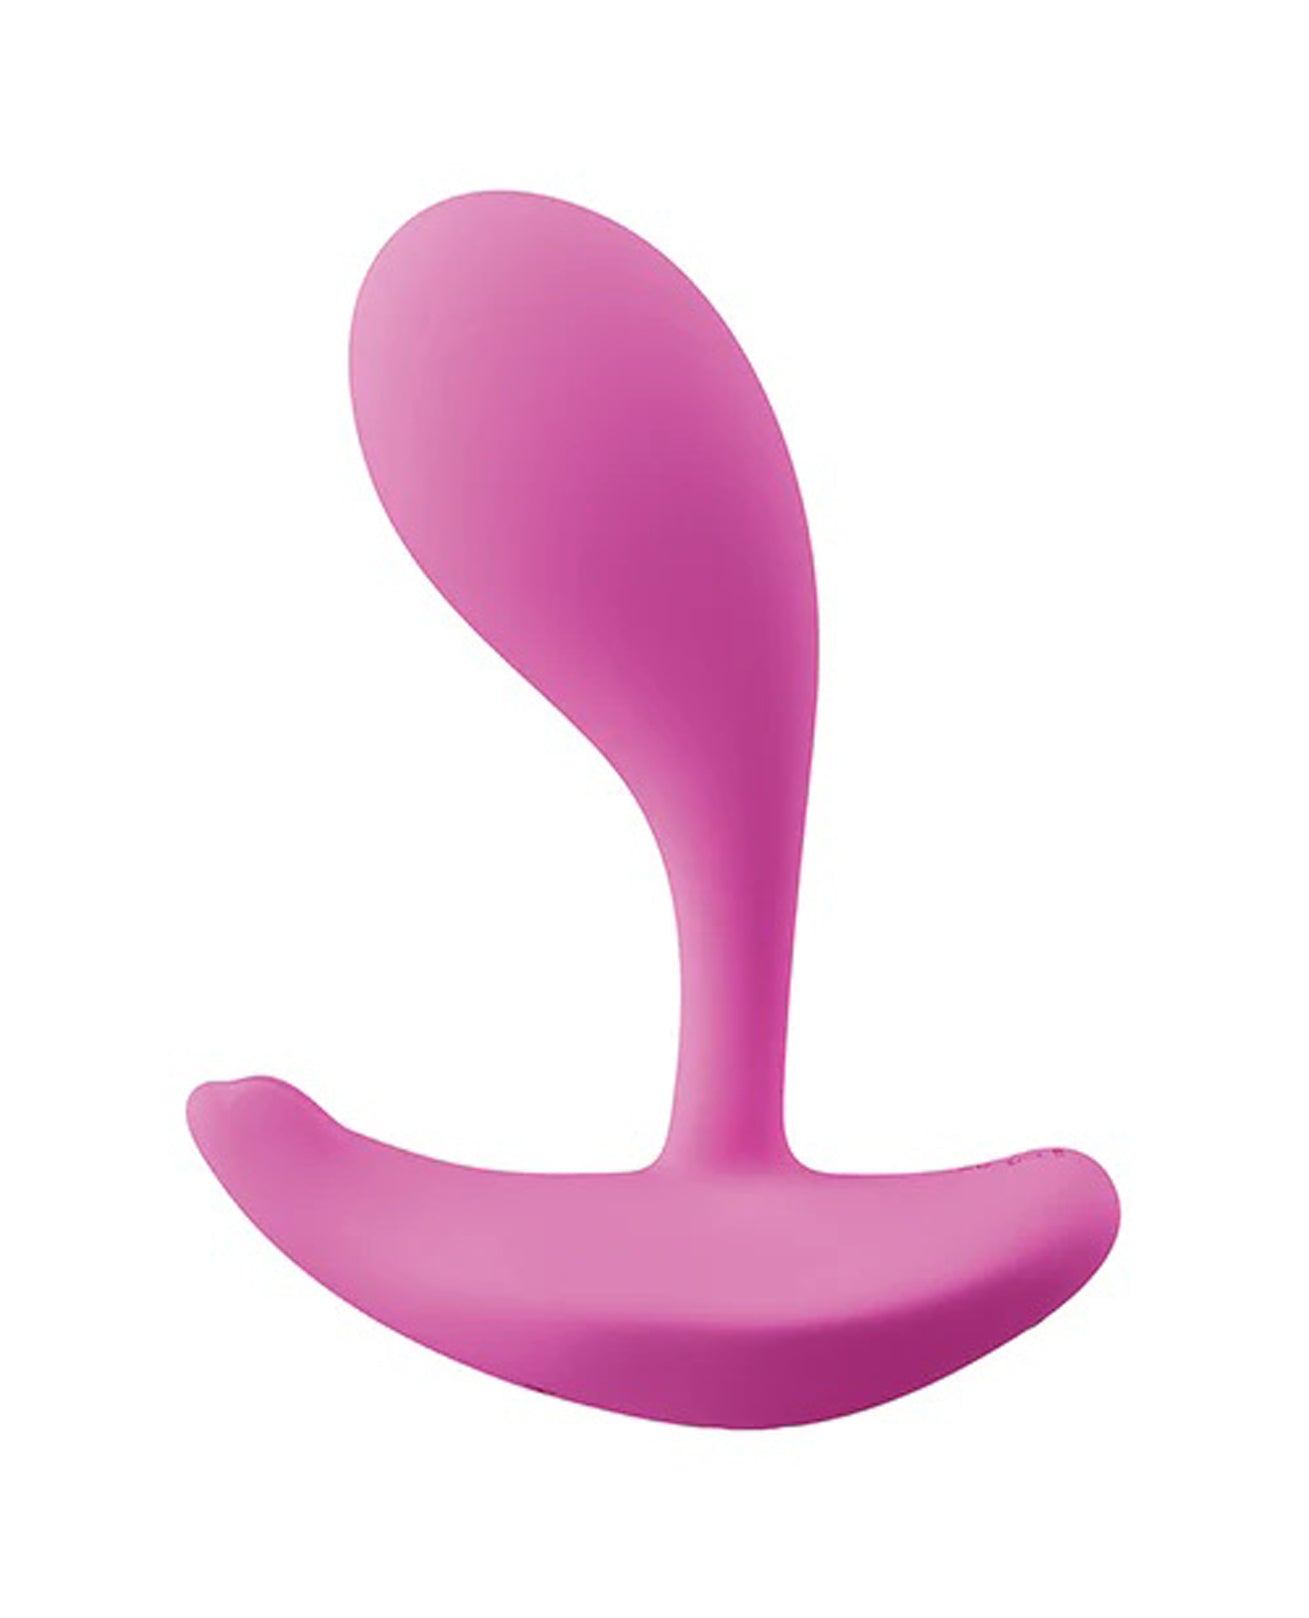 Oly 2 - App Enabled - Clit and G-Spot Vibrator -  Pink H-WE-22-964PI